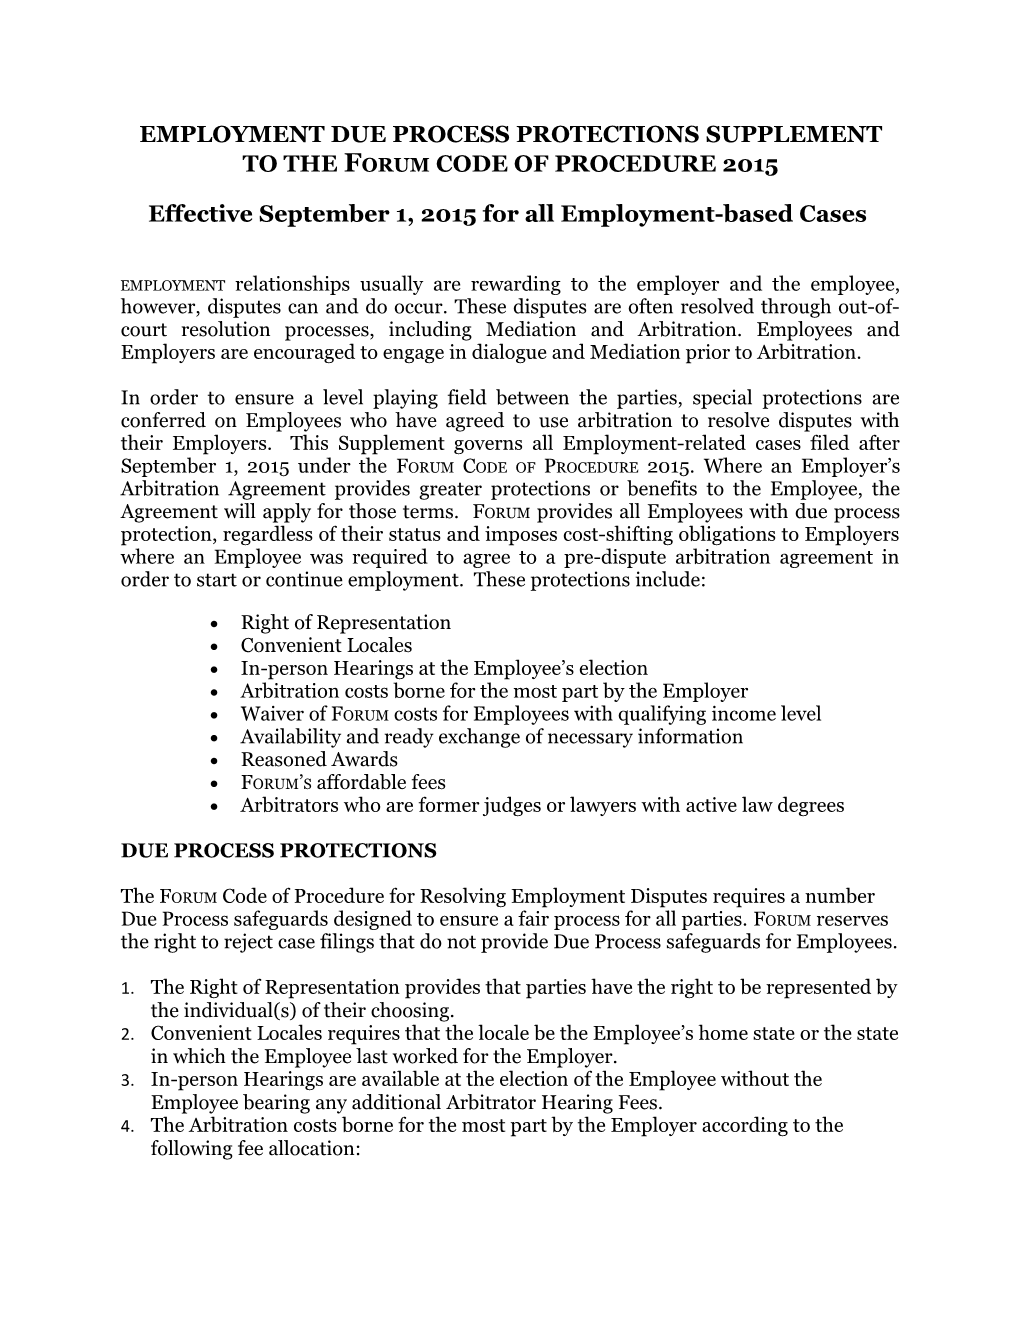 EMPLOYMENT DUE PROCESS PROTECTIONS SUPPLEMENT to the Forum CODE of PROCEDURE 2015